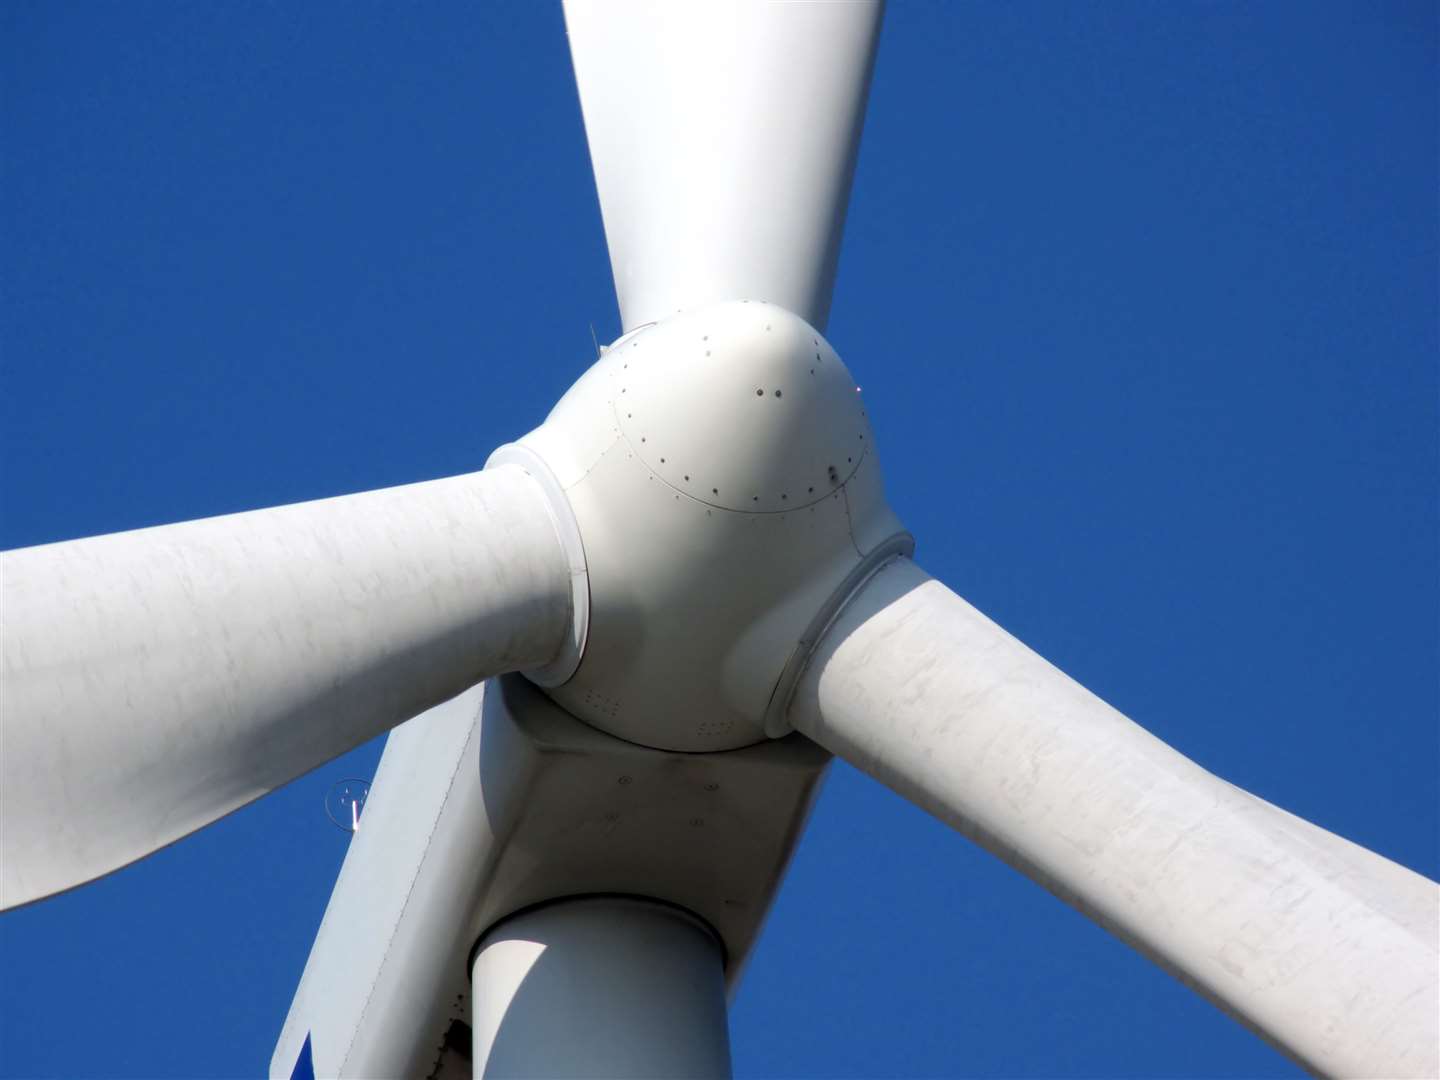 The number of wind turbines proposed at Kintradwell has been reduced from 22 to 15.